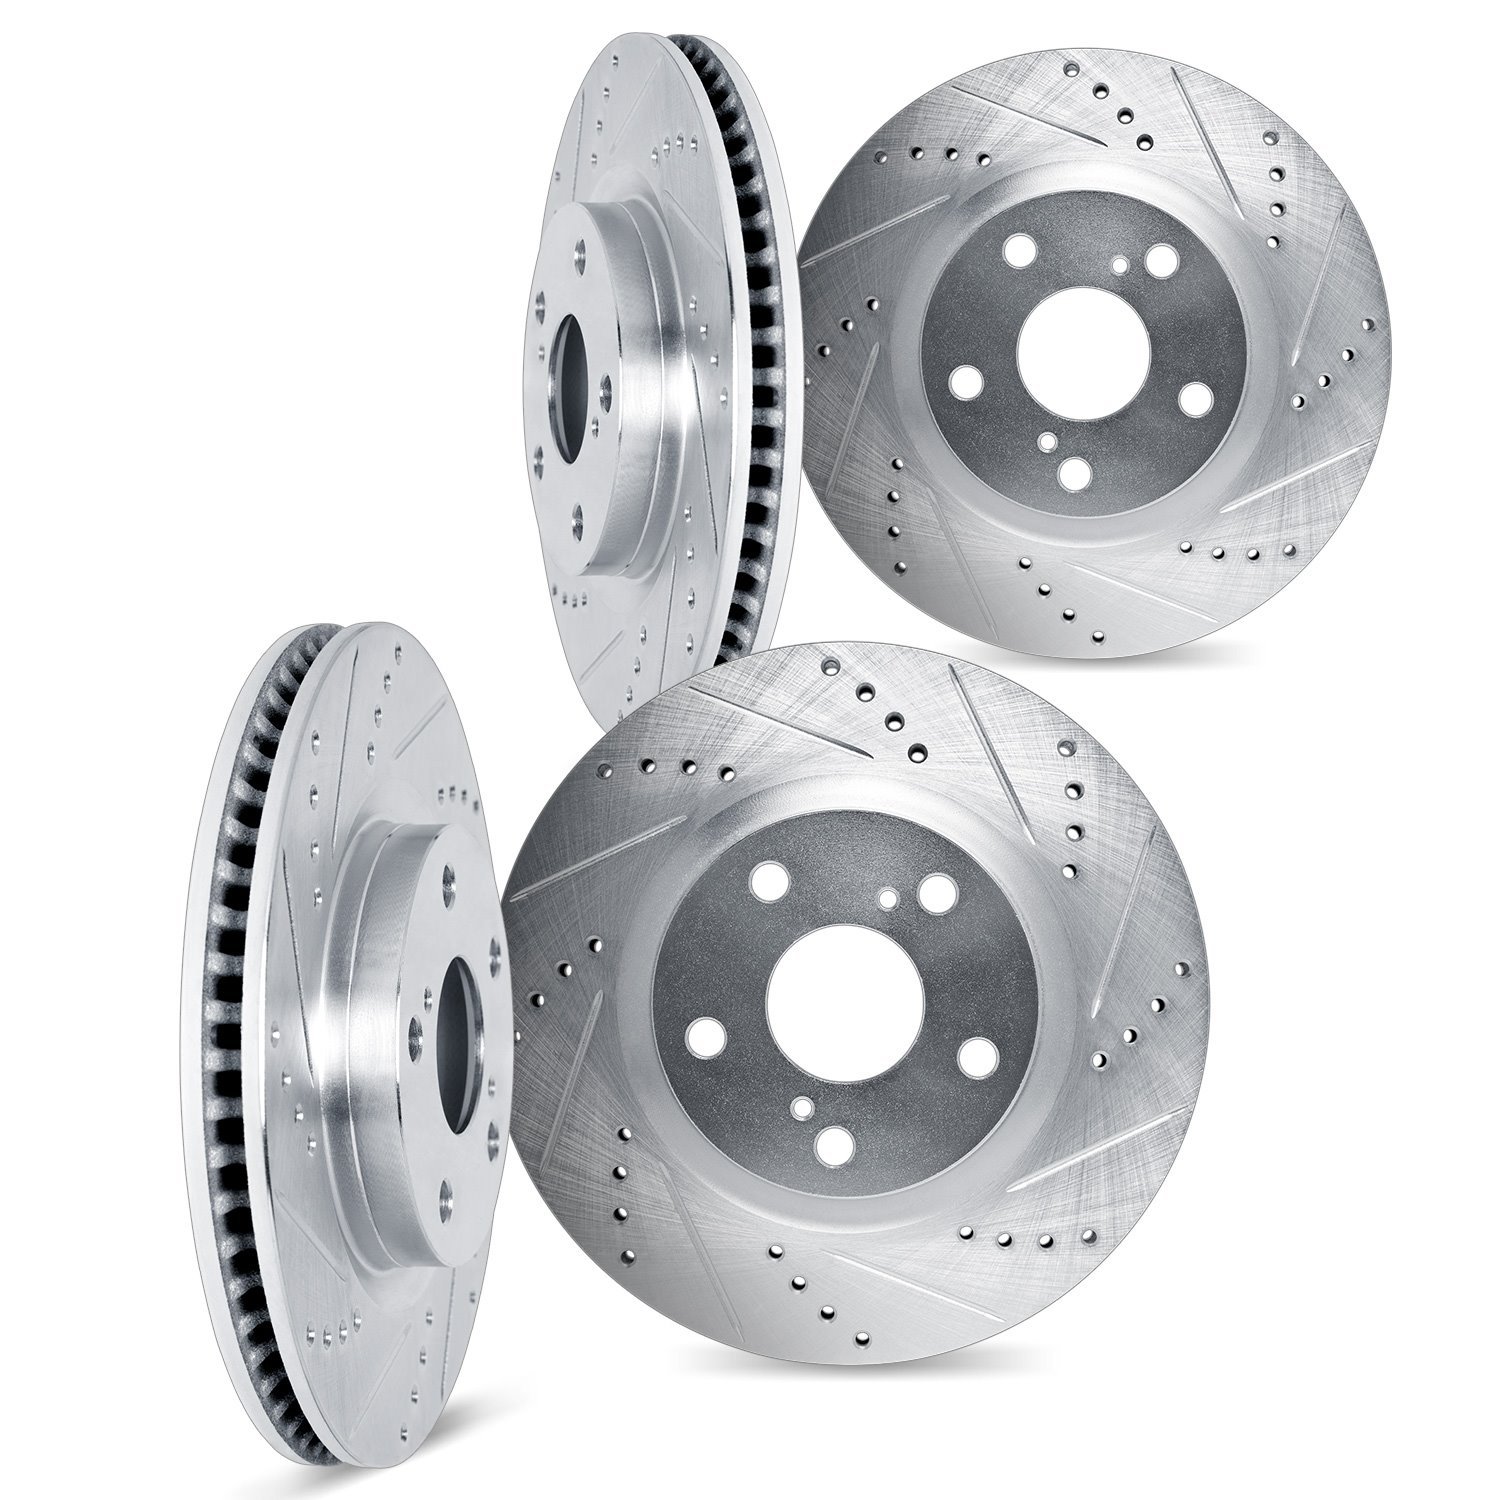 7004-31038 Drilled/Slotted Brake Rotors [Silver], Fits Select Multiple Makes/Models, Position: Front and Rear